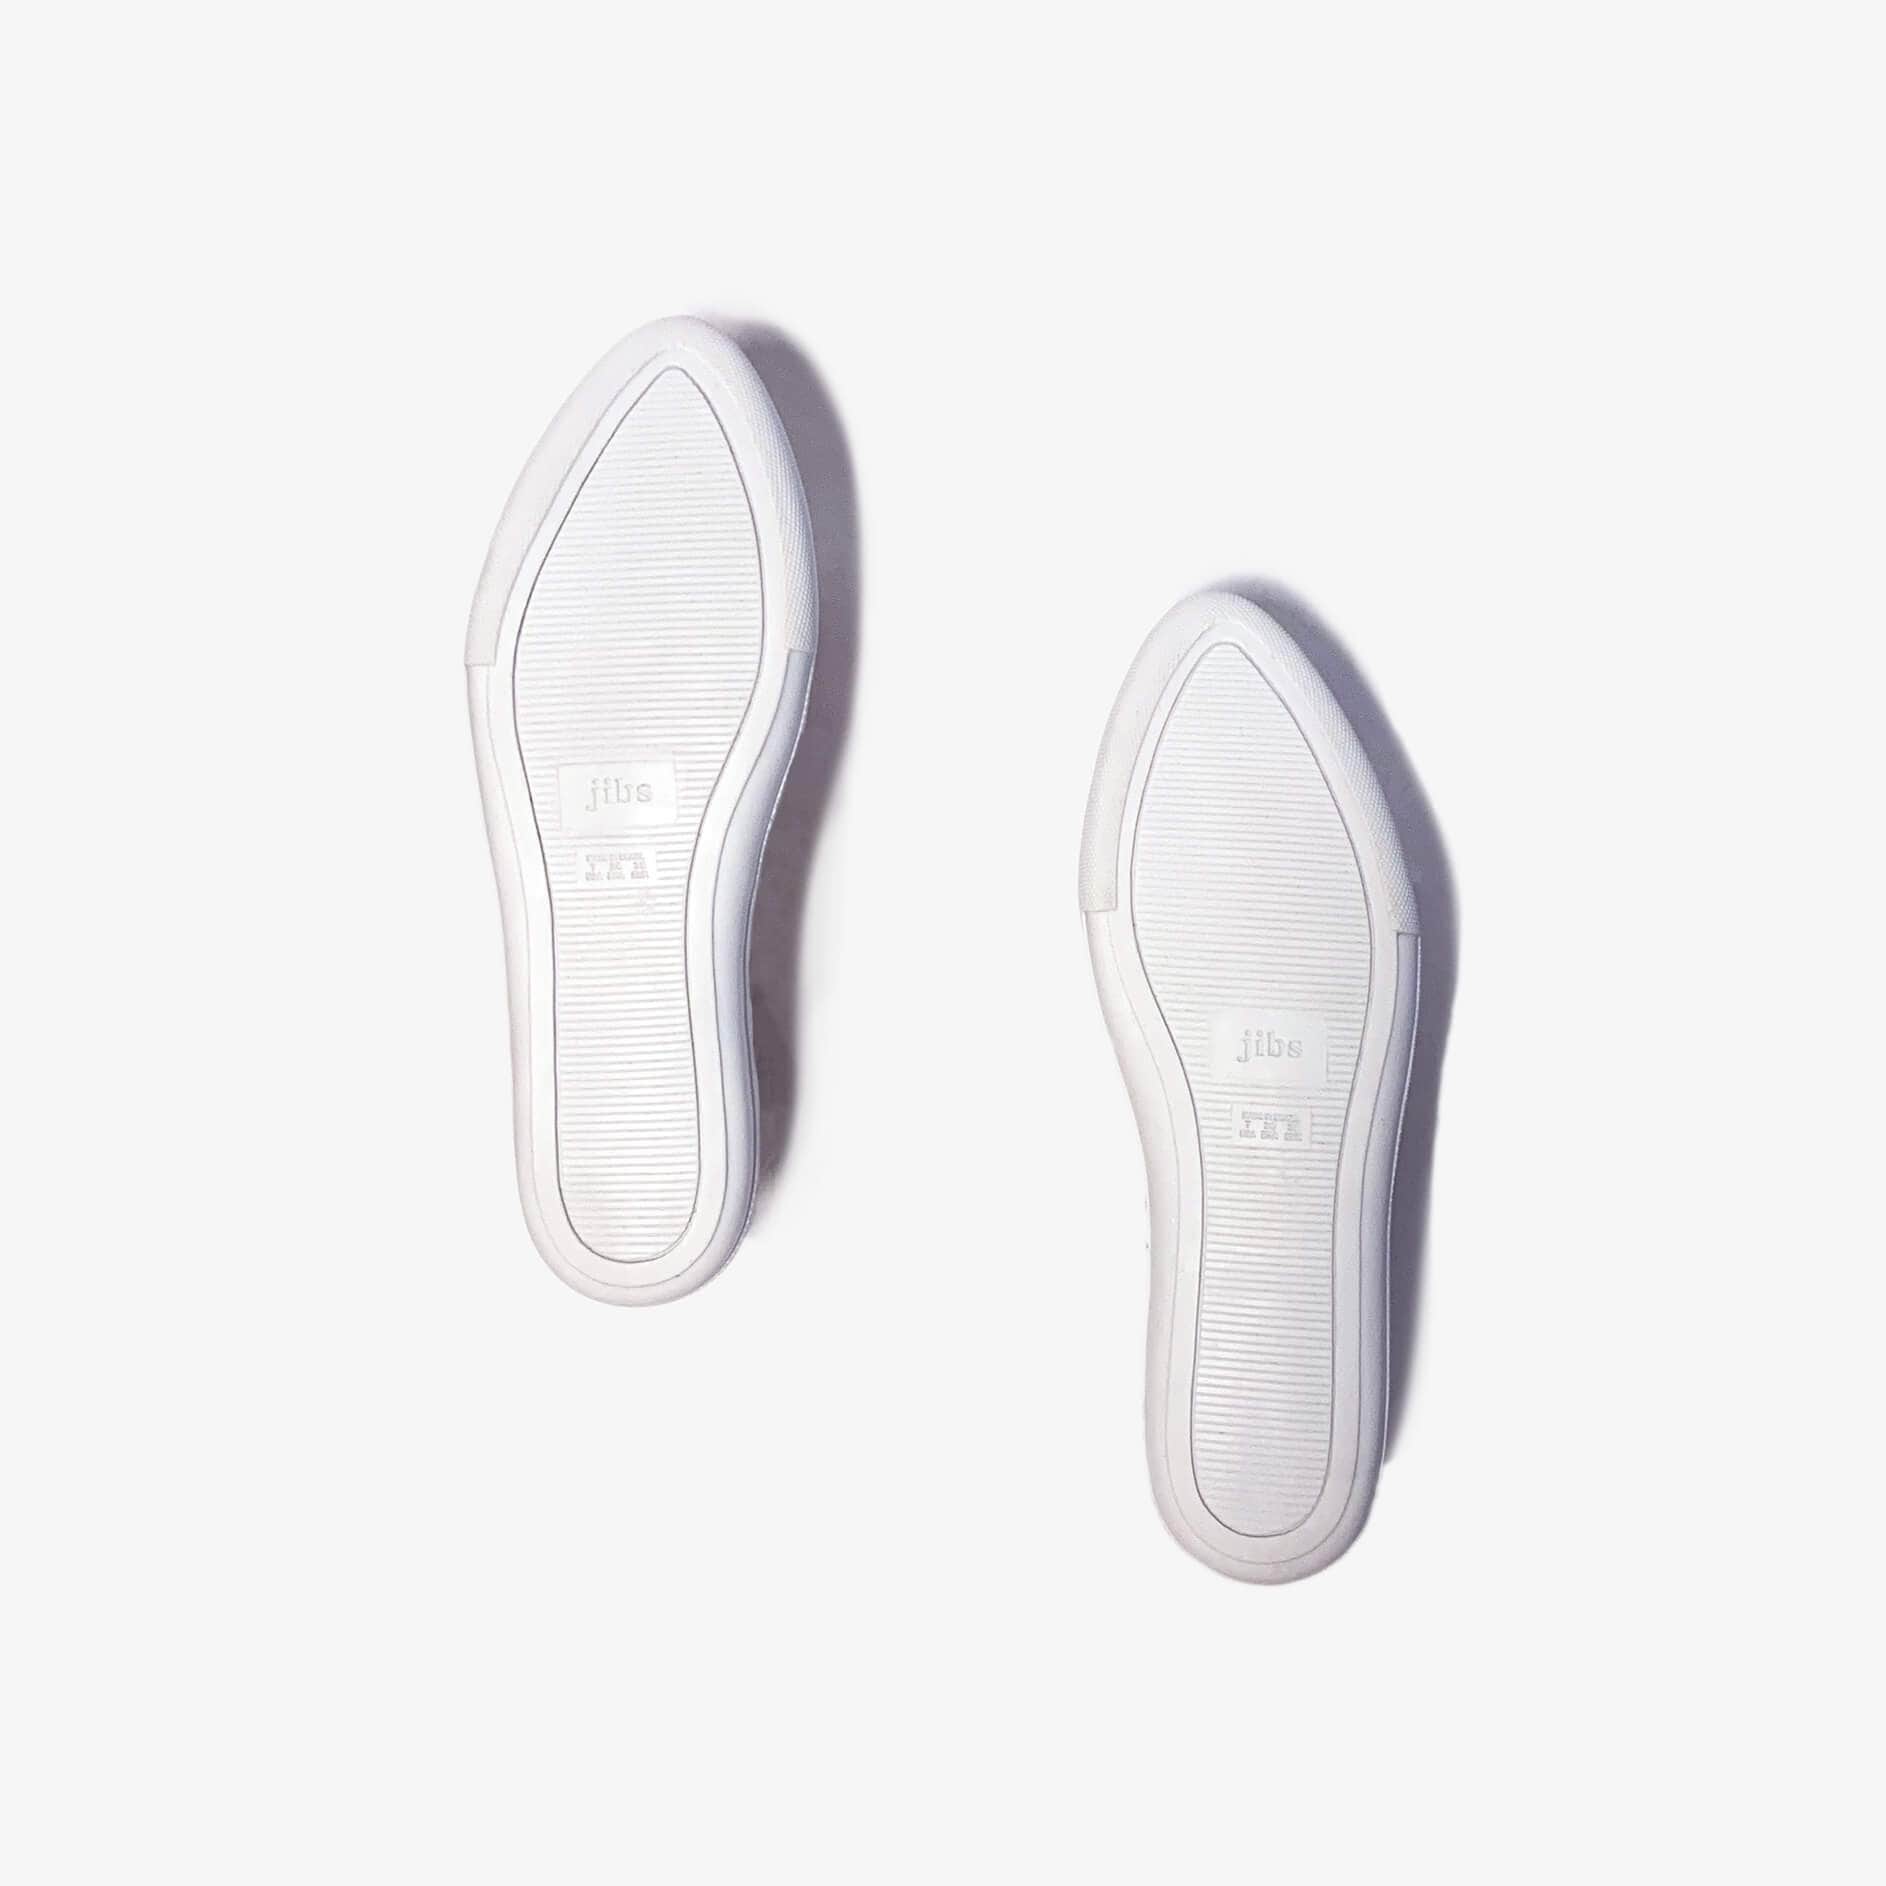 Jibs Slim White + Silver Slip On Sneaker Recycled Rubber Sole